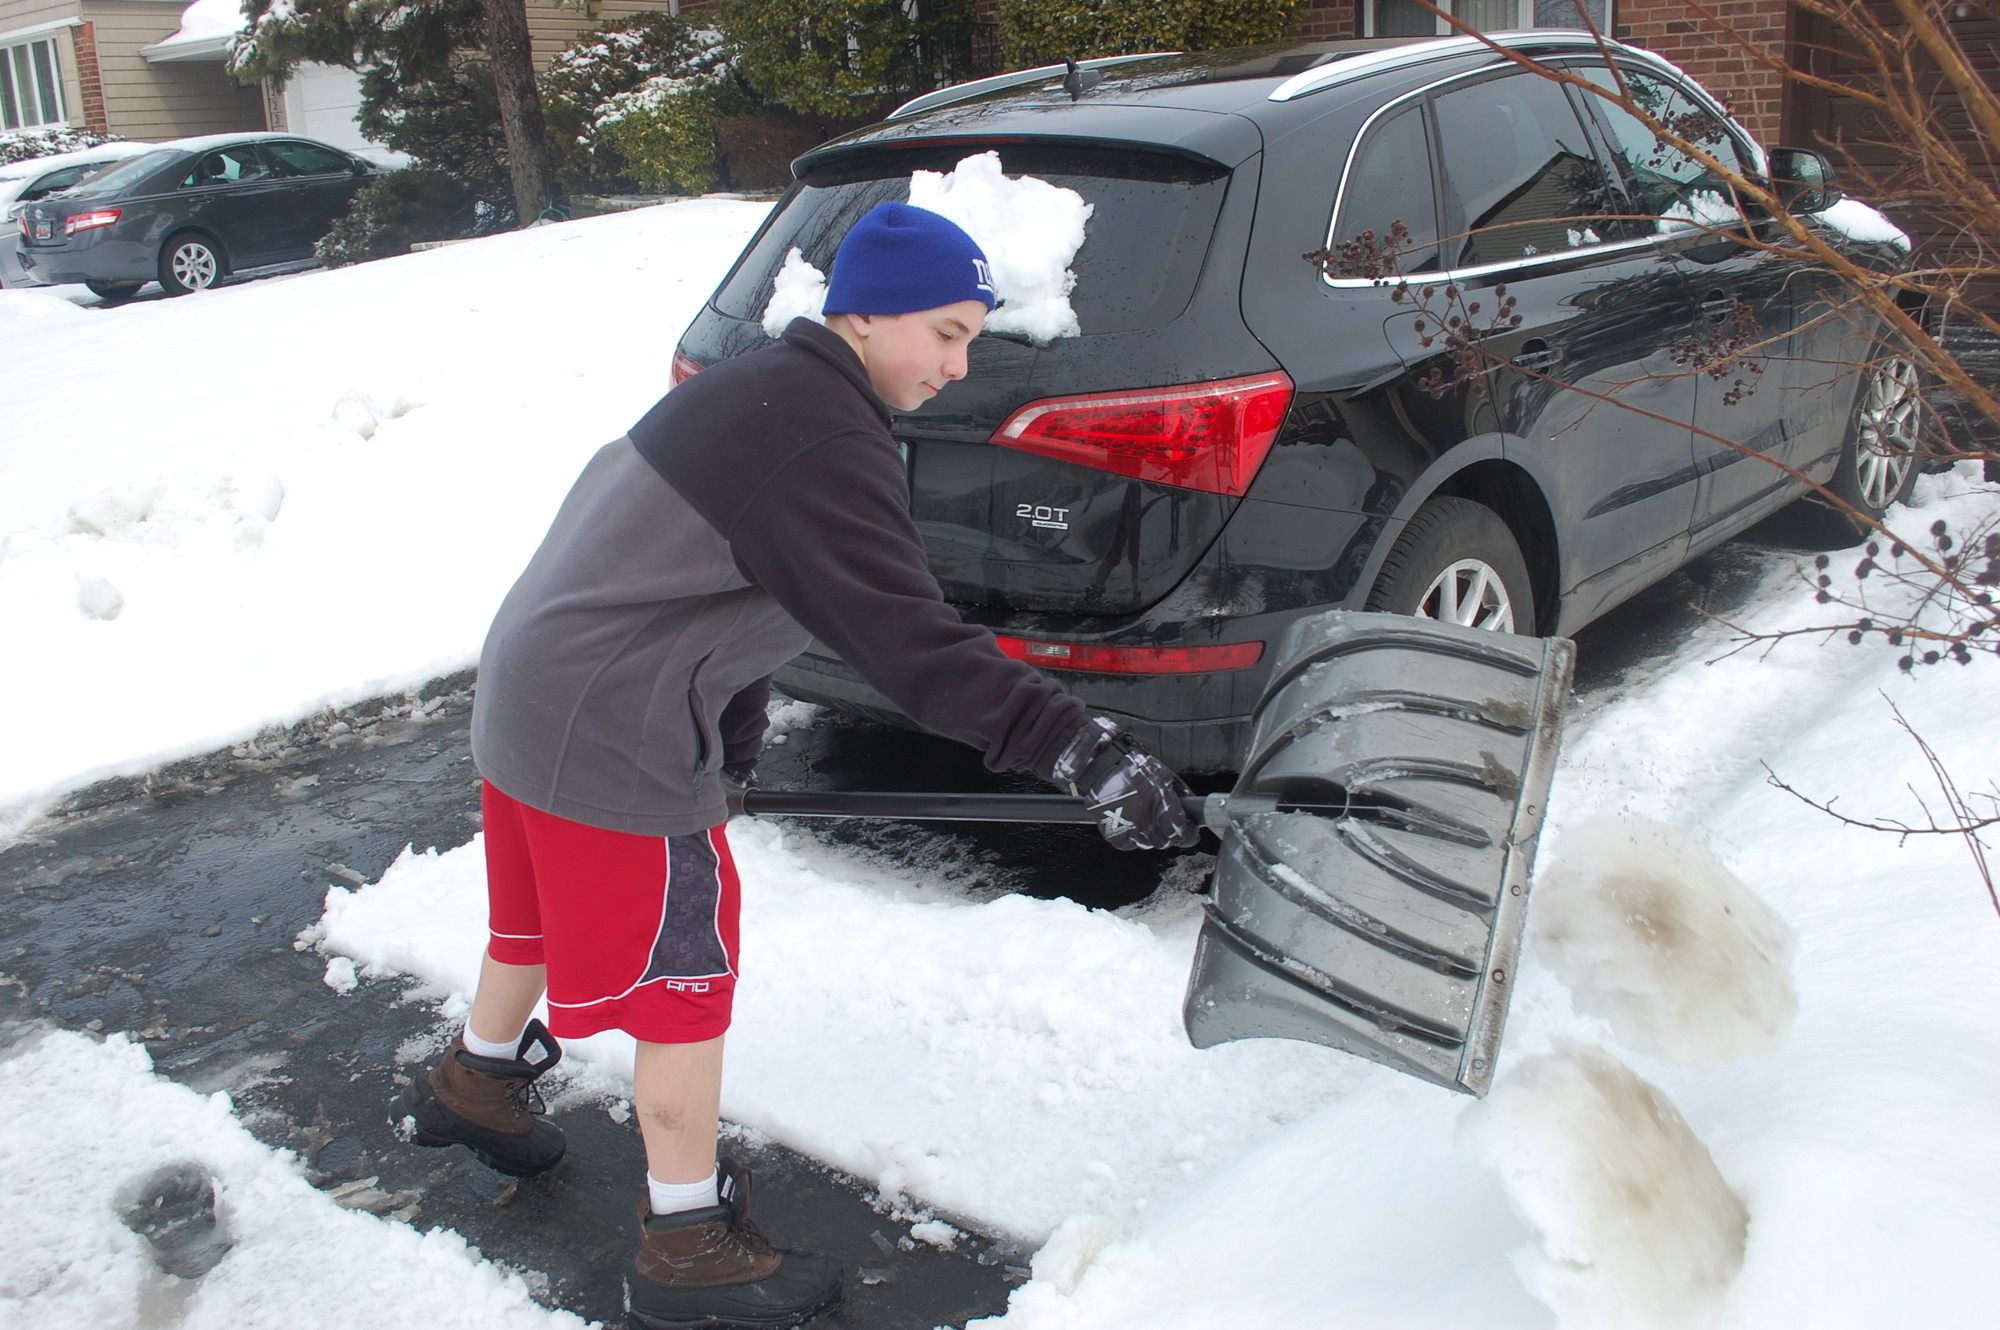 With baseball Practice set for that afternoon, 13-year-old Sean Cunnane, of Wantagh, was already dressed for the part as he shoveled out for a neighbor on Jonathan Lane last Sunday following the latest bout of snow.